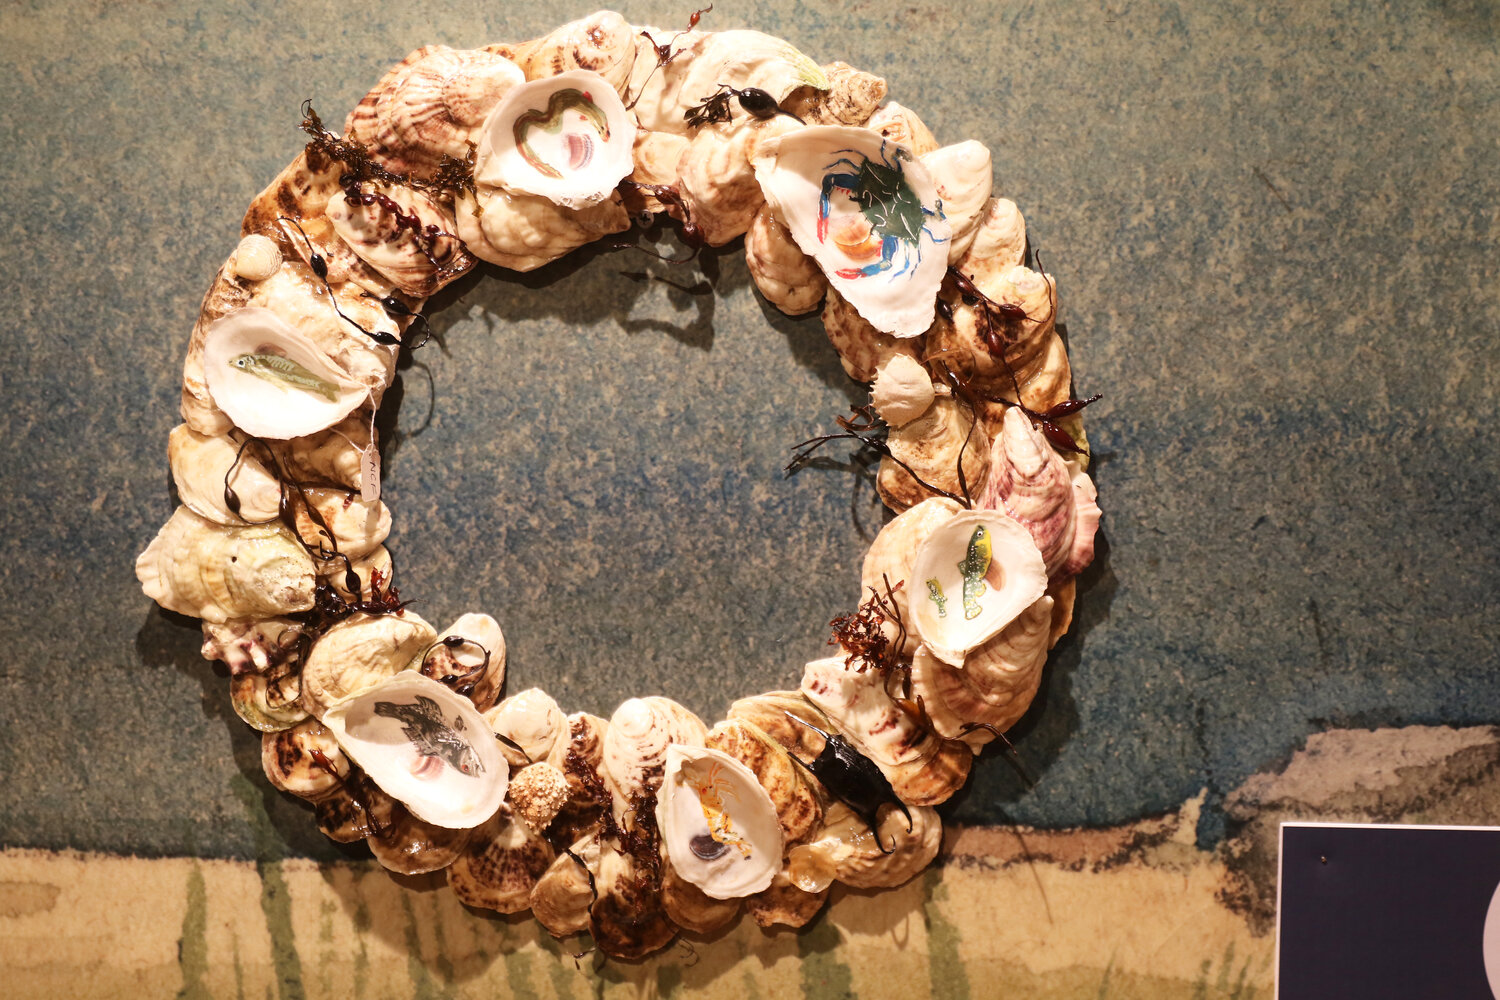 The Nantucket Conservation Foundation’s entry is made of oyster shells hand-painted with Nantucket marine life.